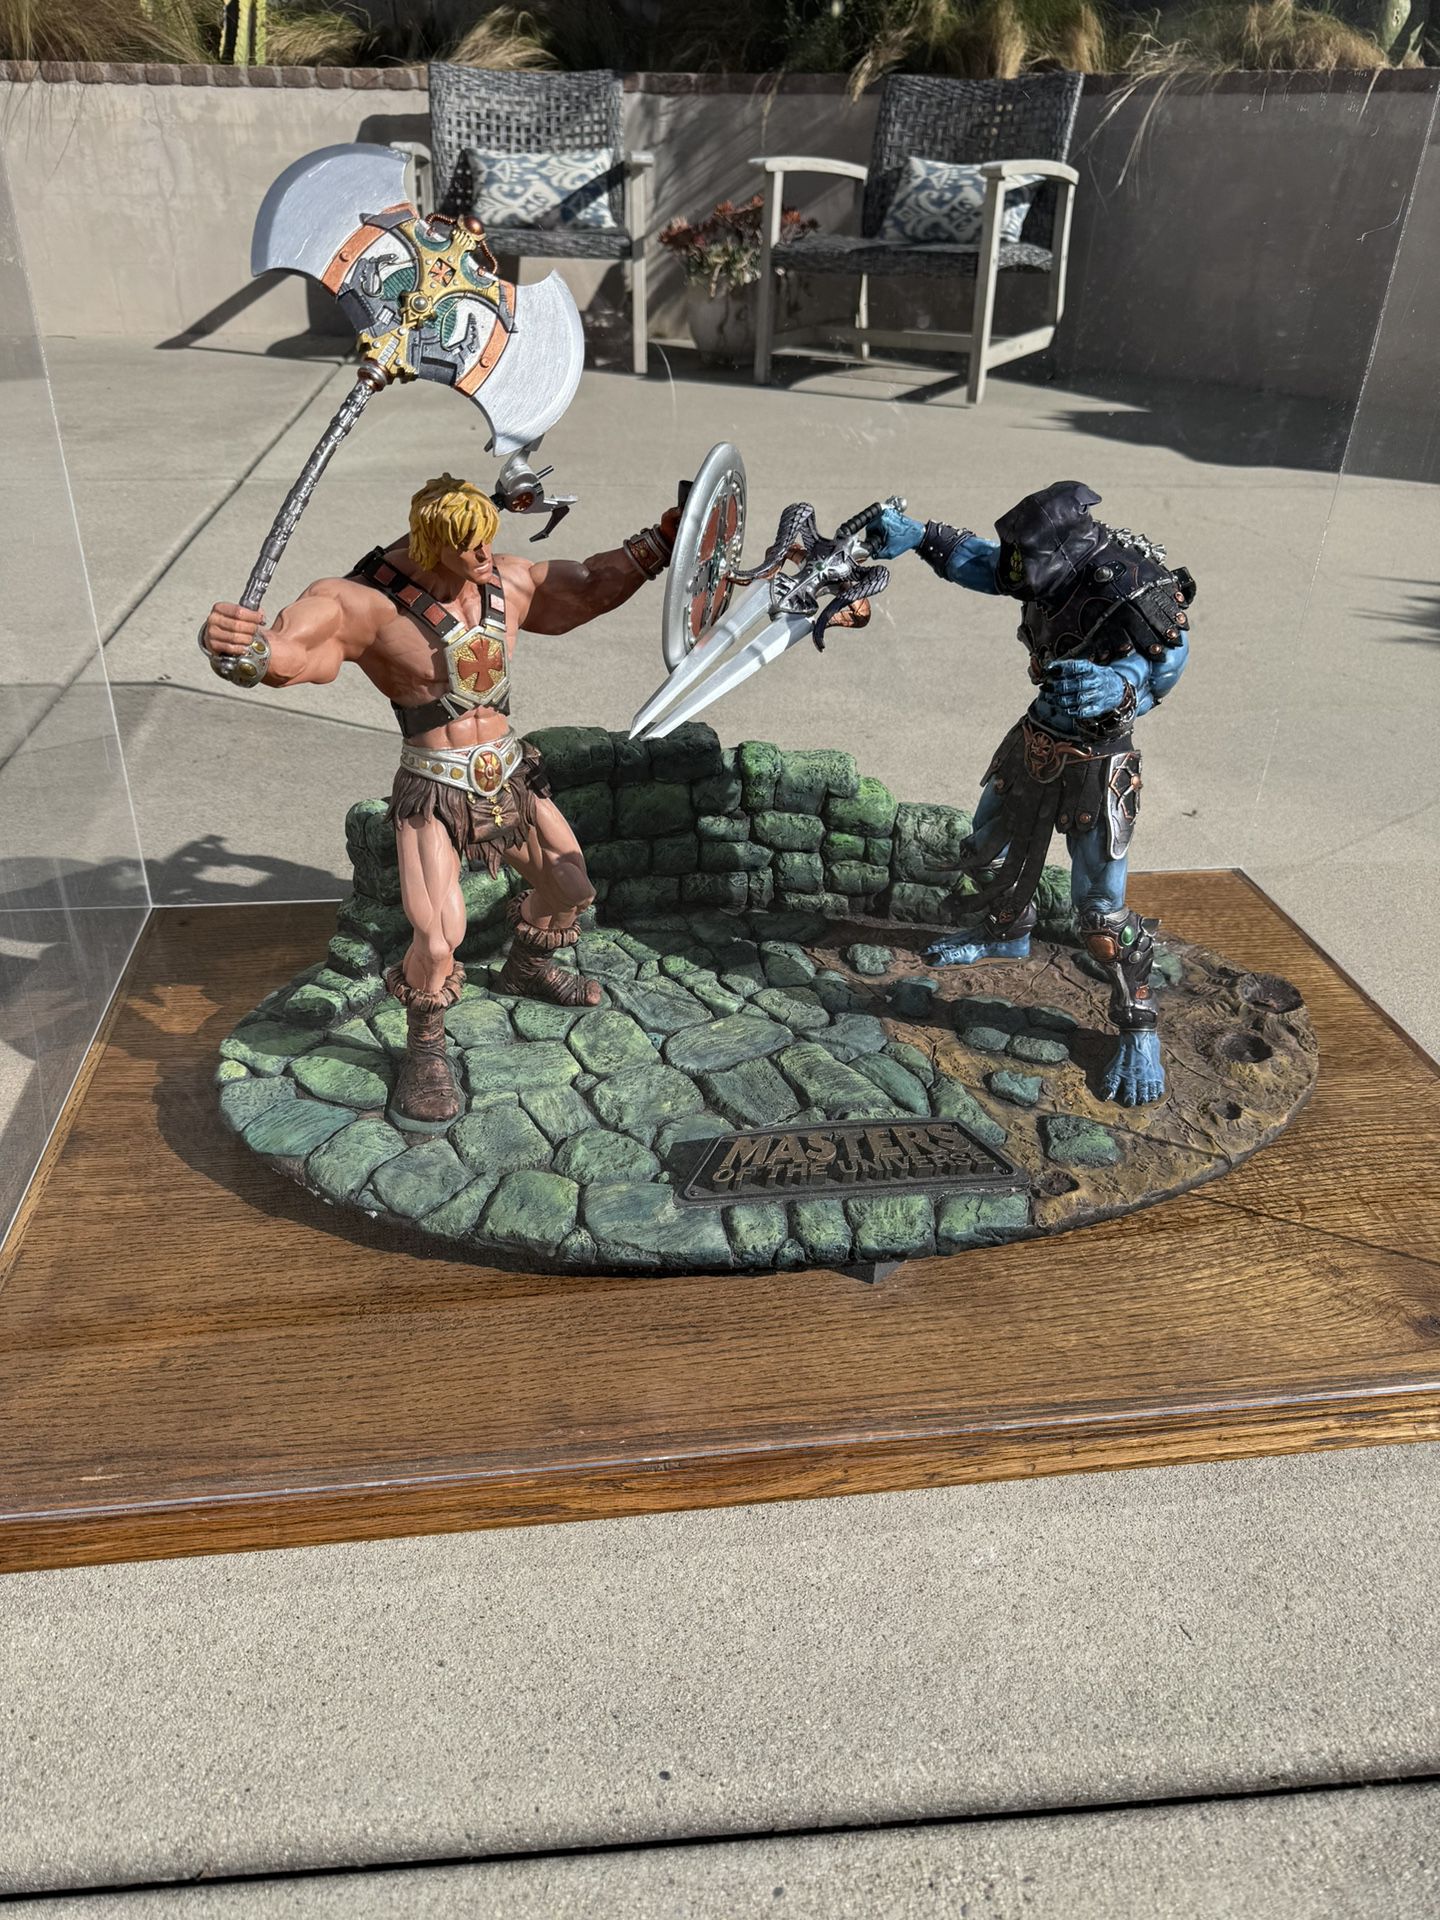 RARE 1 Of 1 Masters Of the Universe Statue Set